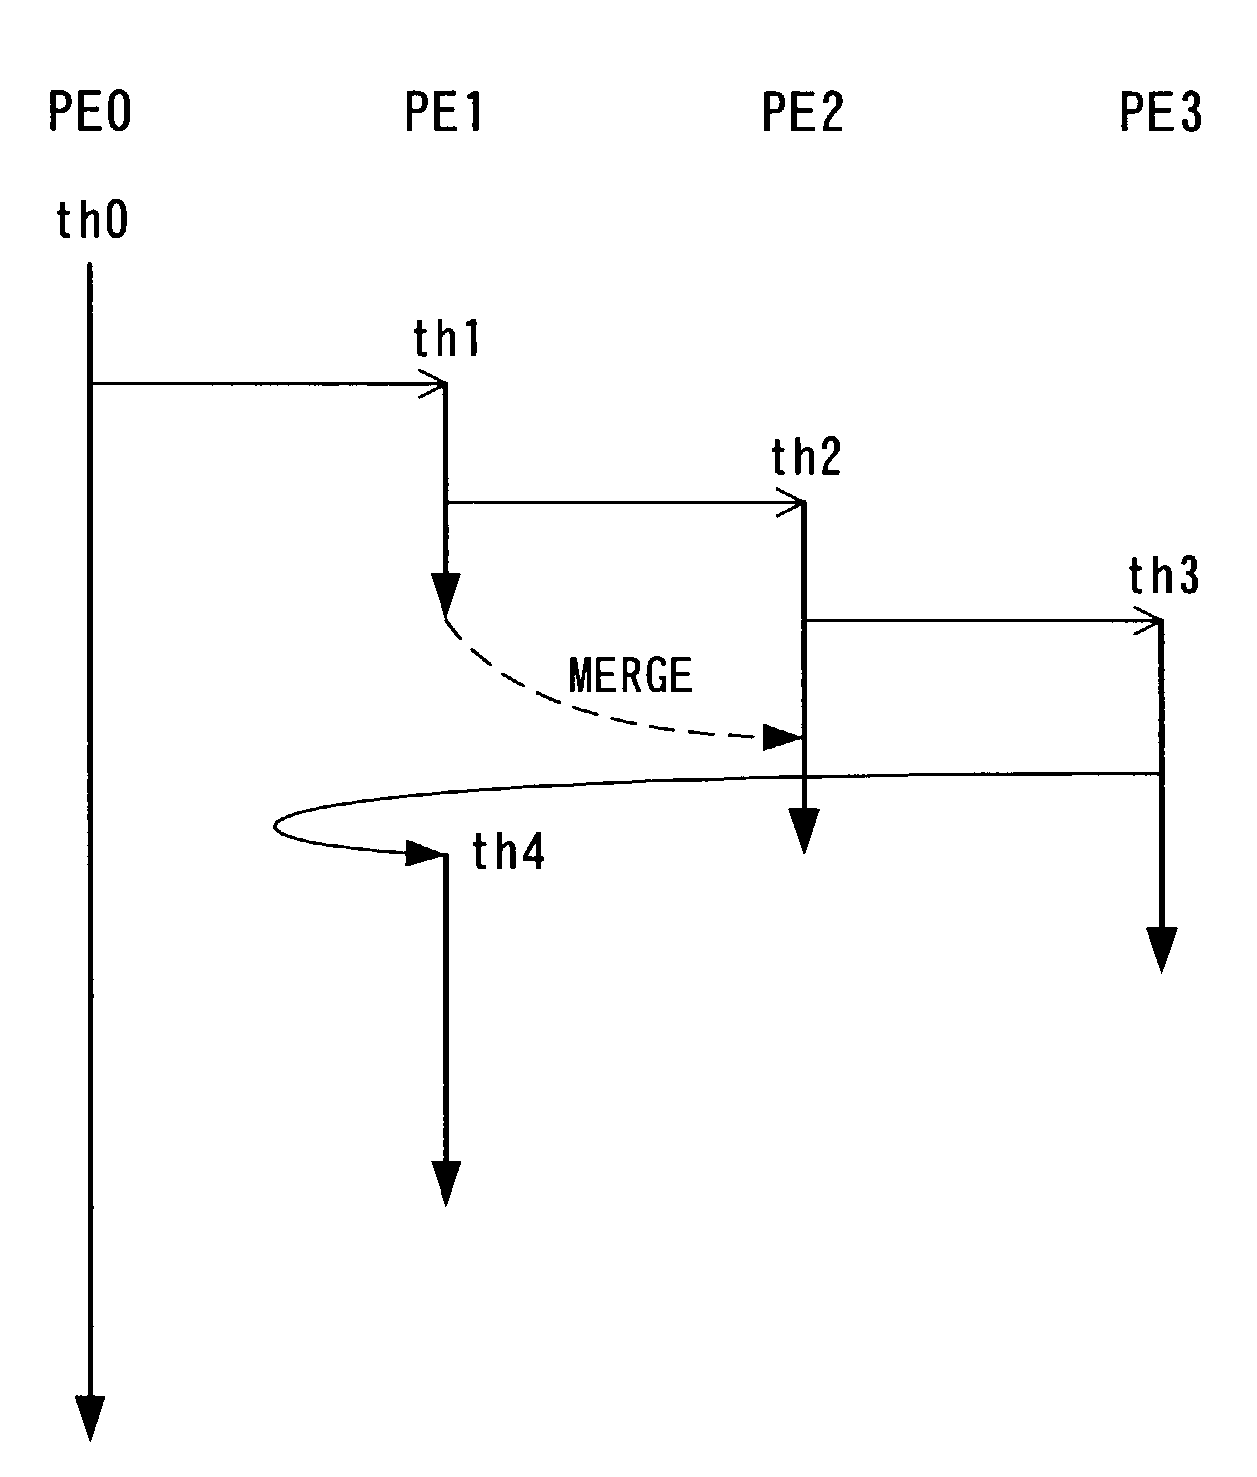 Multi-thread execution method and parallel processor system